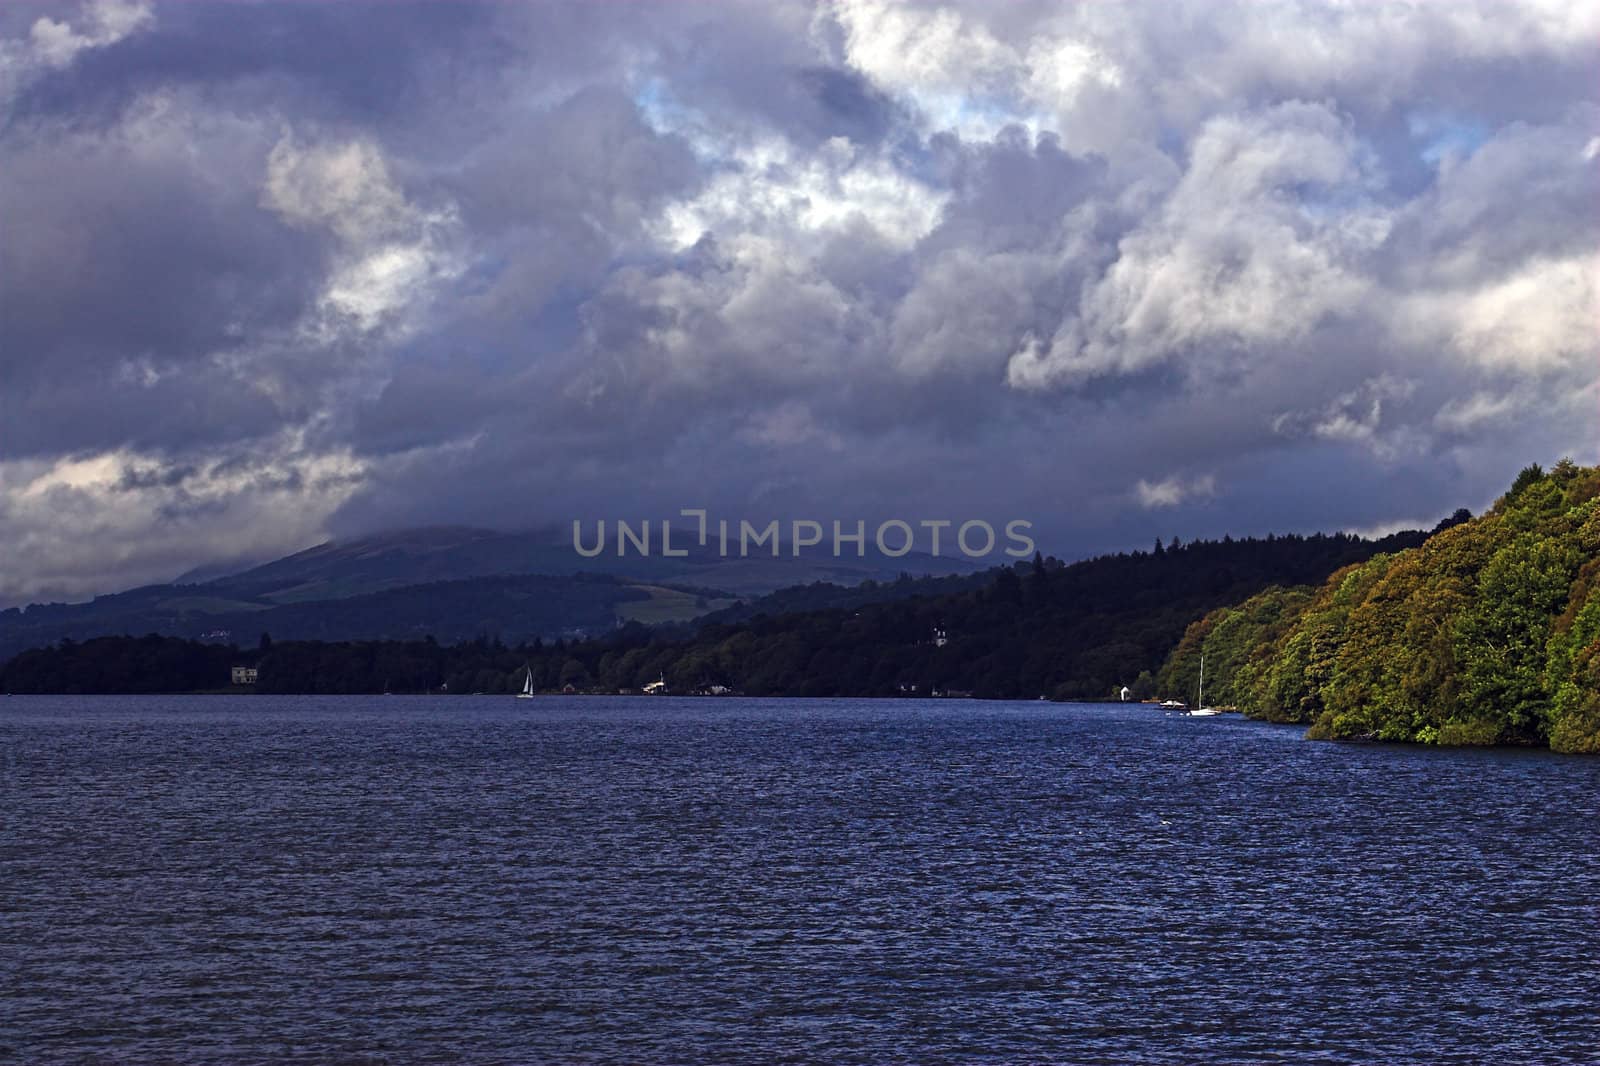 A storm gathers over Lake Windemere